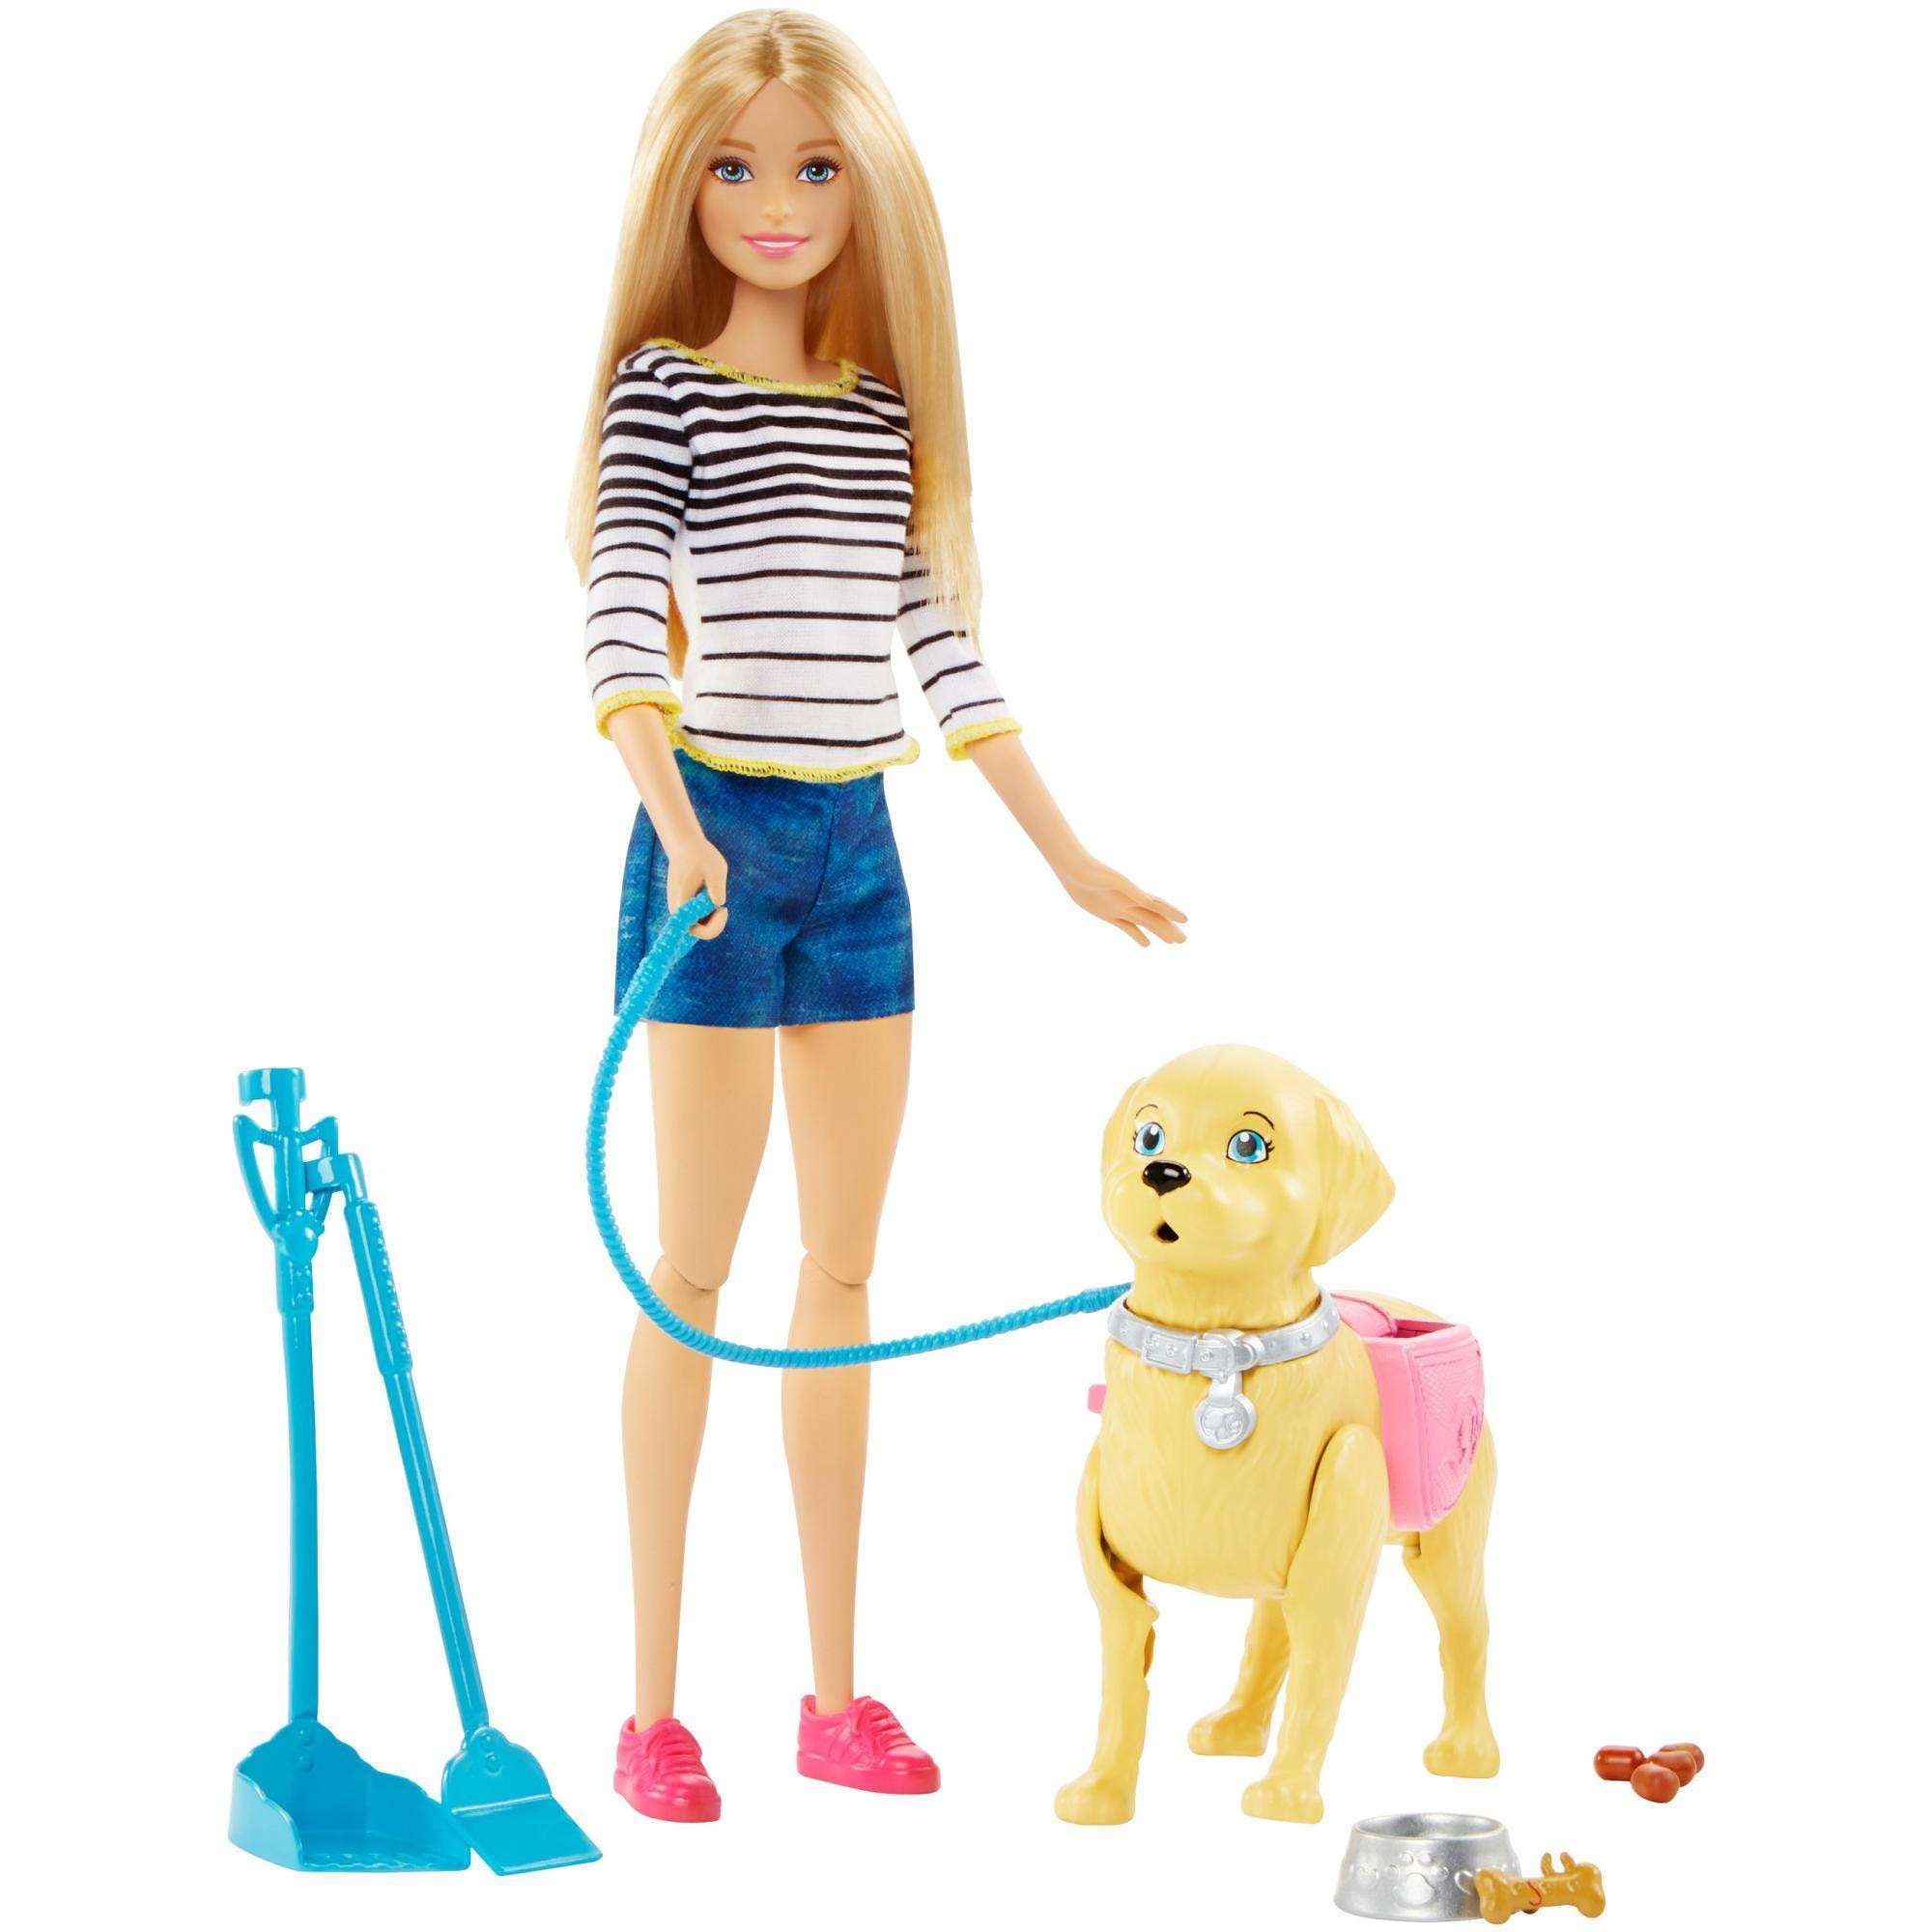 Barbie Extra Doll 2 in Shimmery Look with Pet Puppy, Pink and 